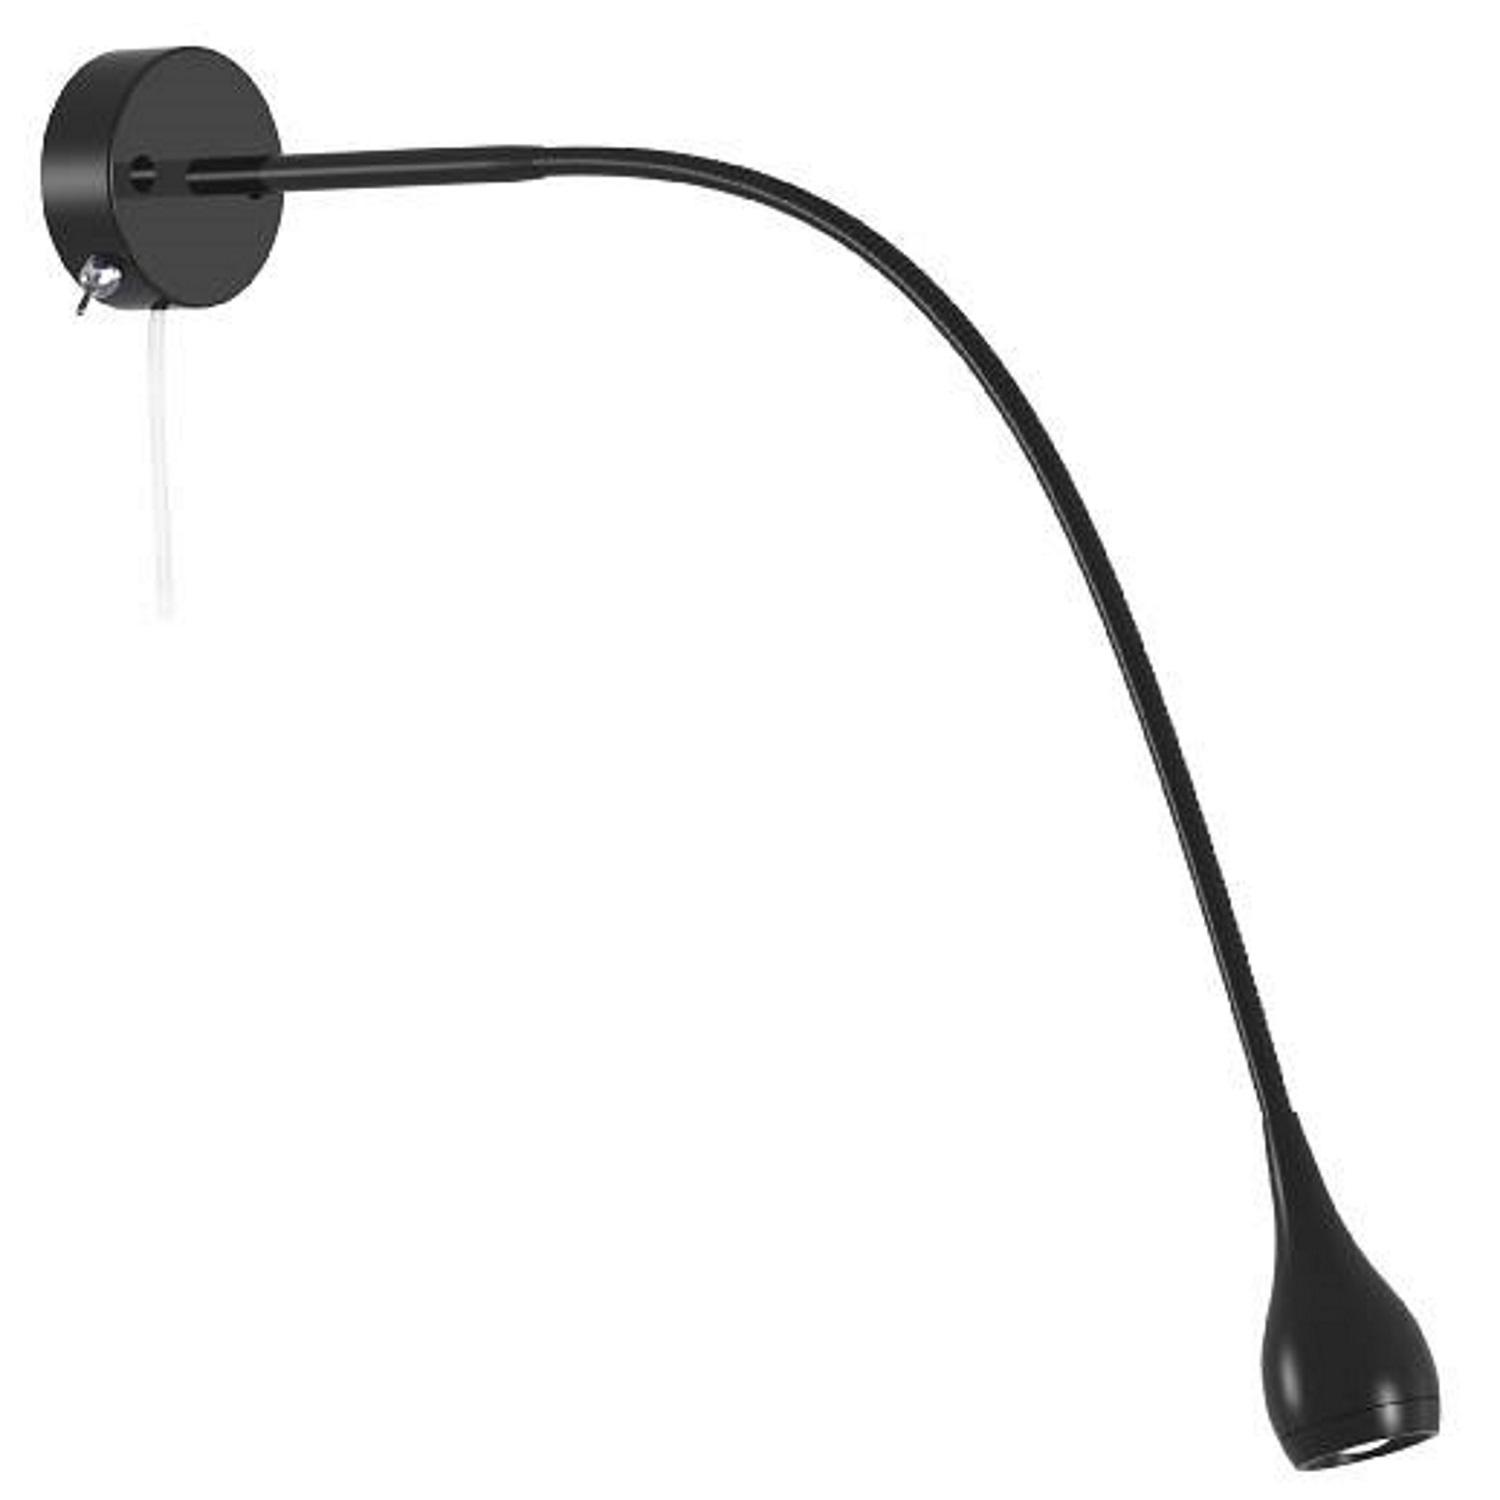 Drop LED Flexi-Arm Wall Light | The Lighting Superstore